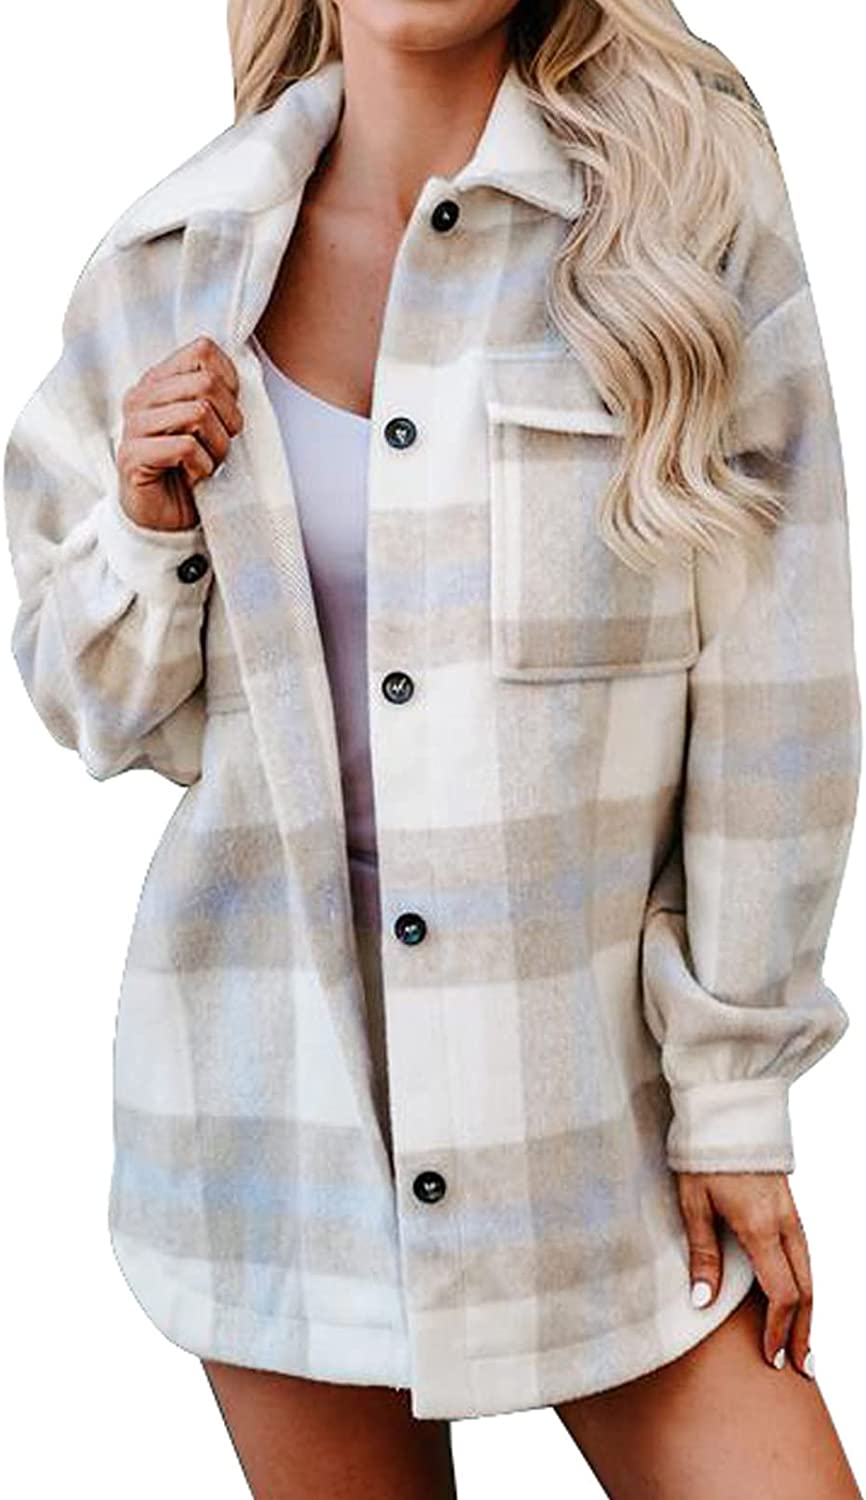 RASPBERRY PUDDING Flannel Plaid Cotton Shirt for Women Long Sleeve